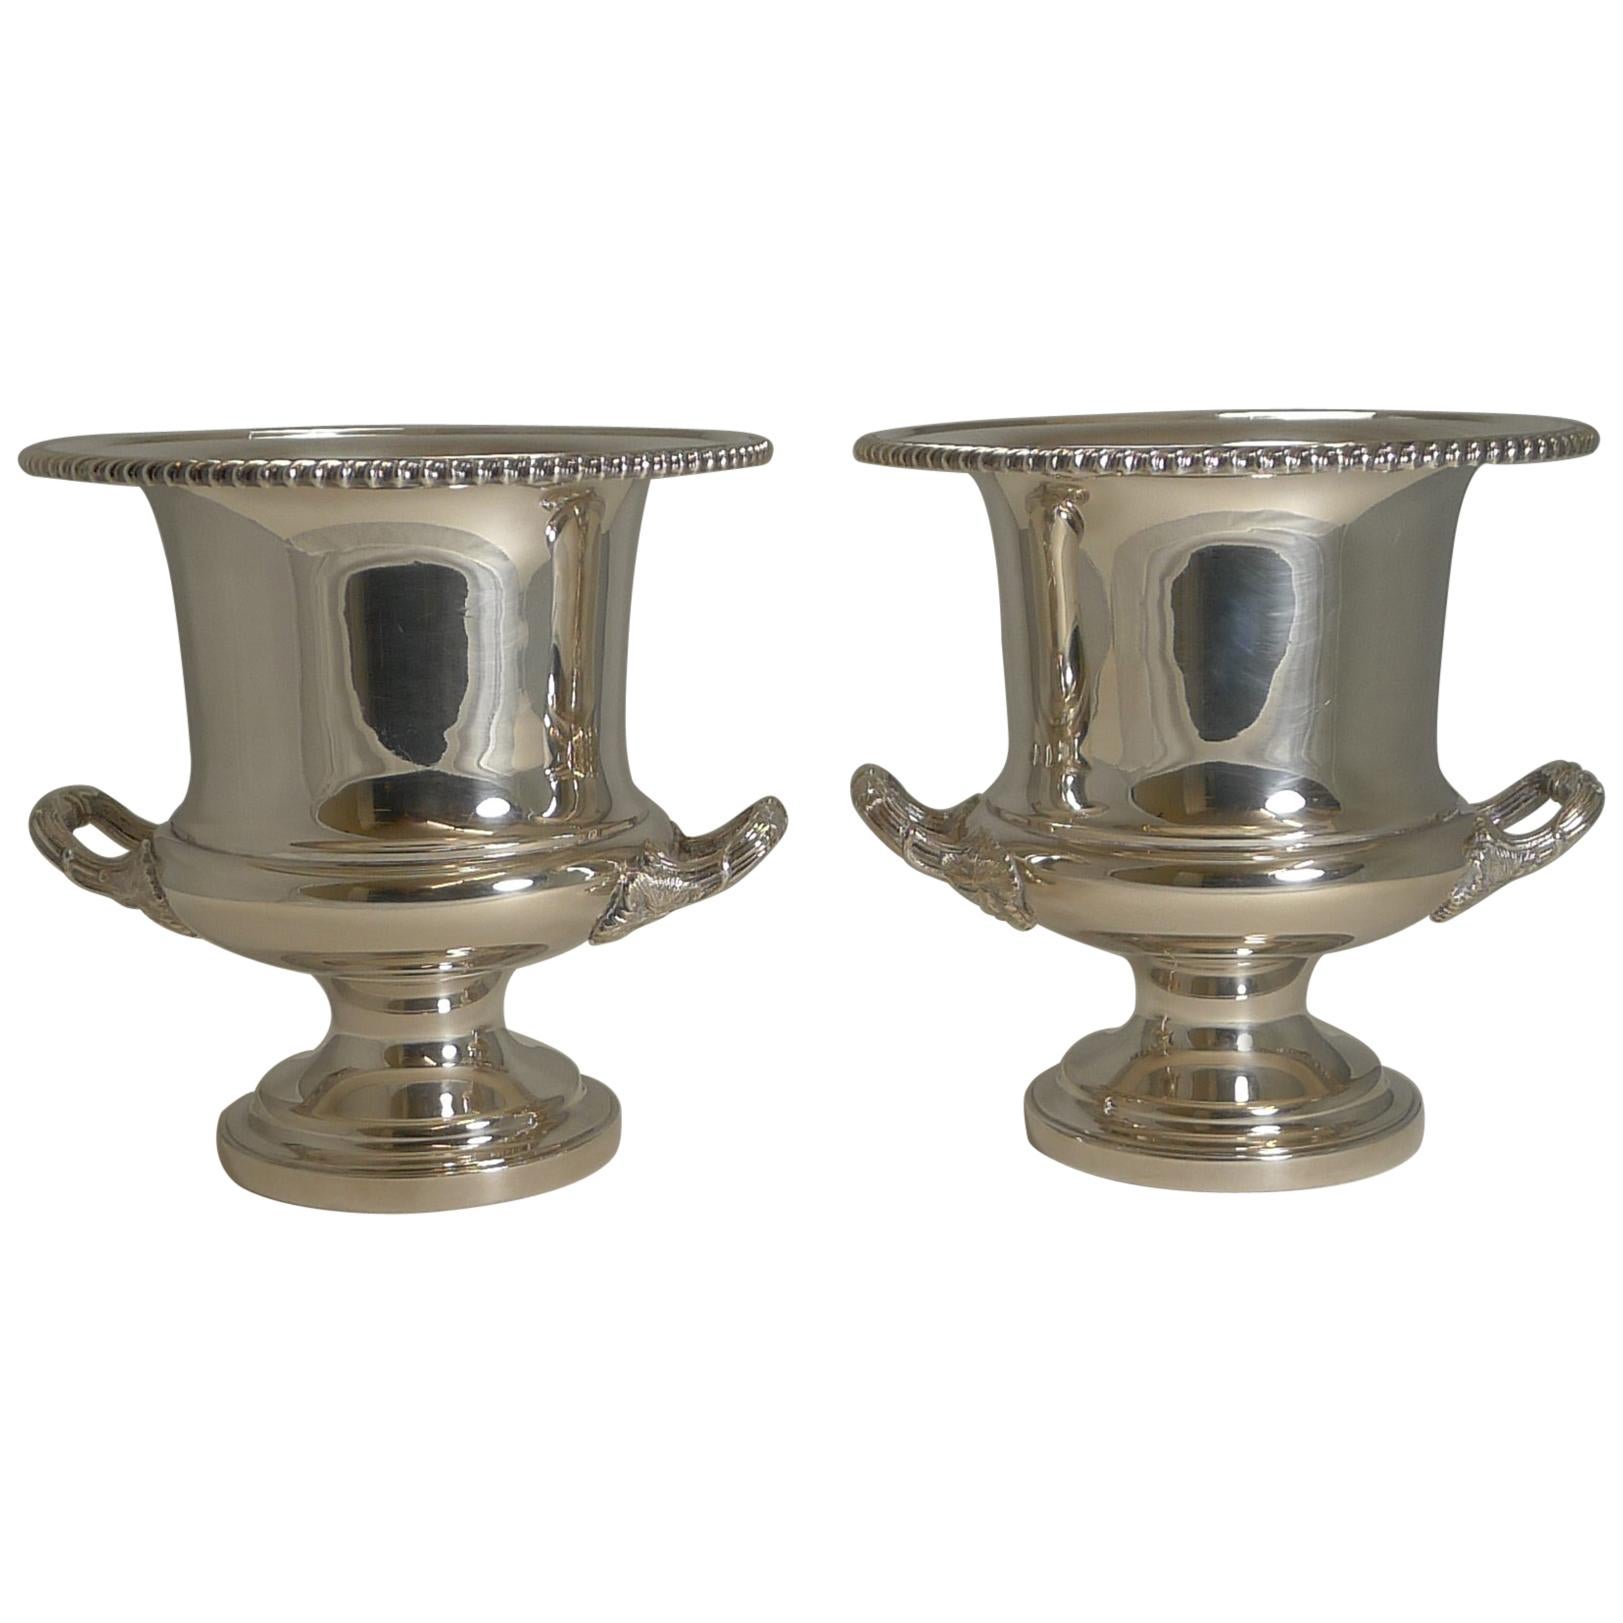 Pair of Antique English Silver Plated Wine or Champagne Coolers, circa 1910-1920